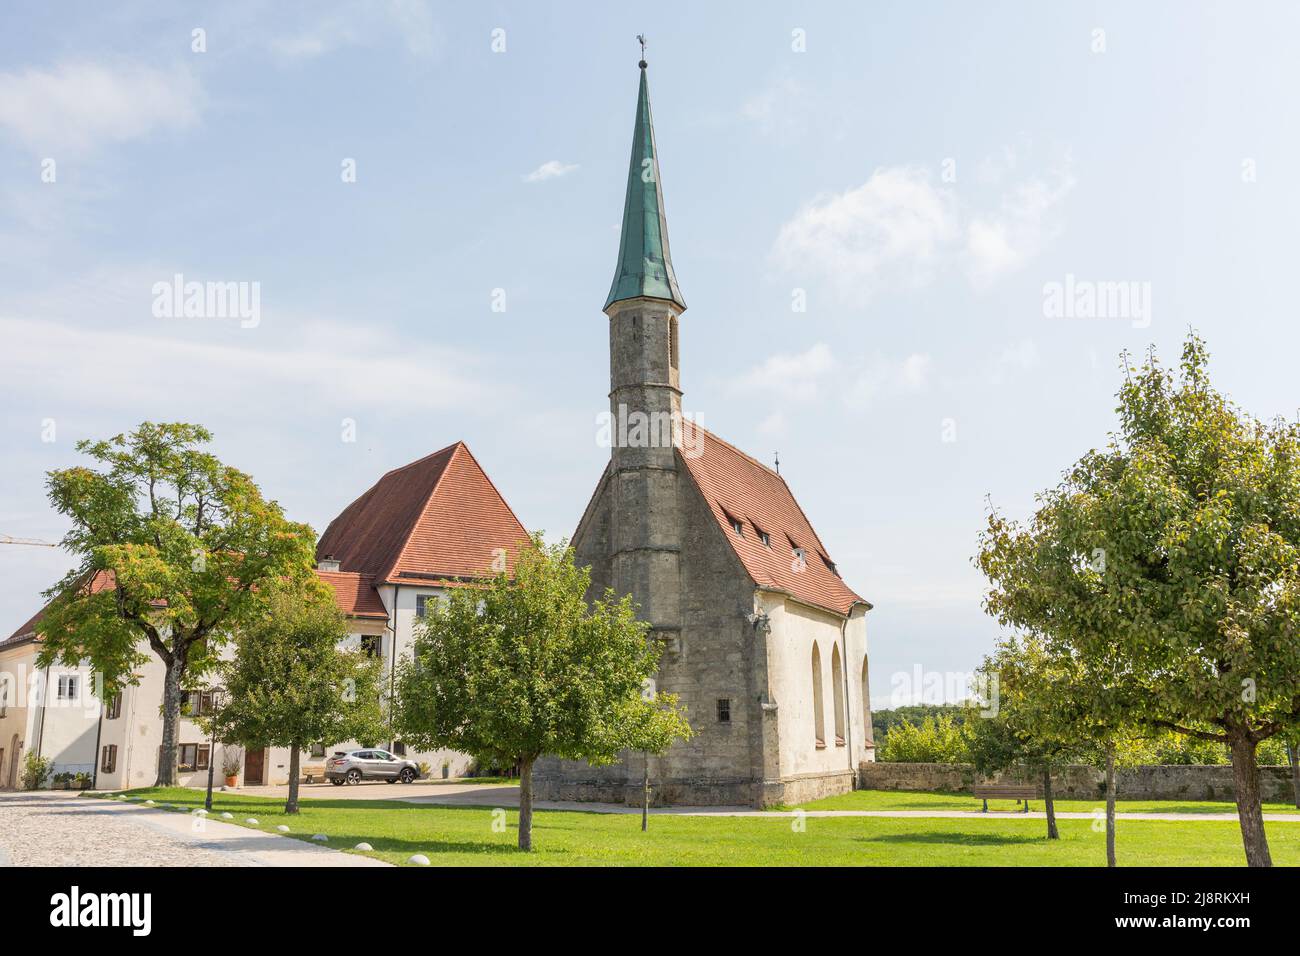 Burghausen, Germany - Jul 25, 2021: View on Hedwigskapelle. A medieval church inside the walls of Burghausen castle. Stock Photo